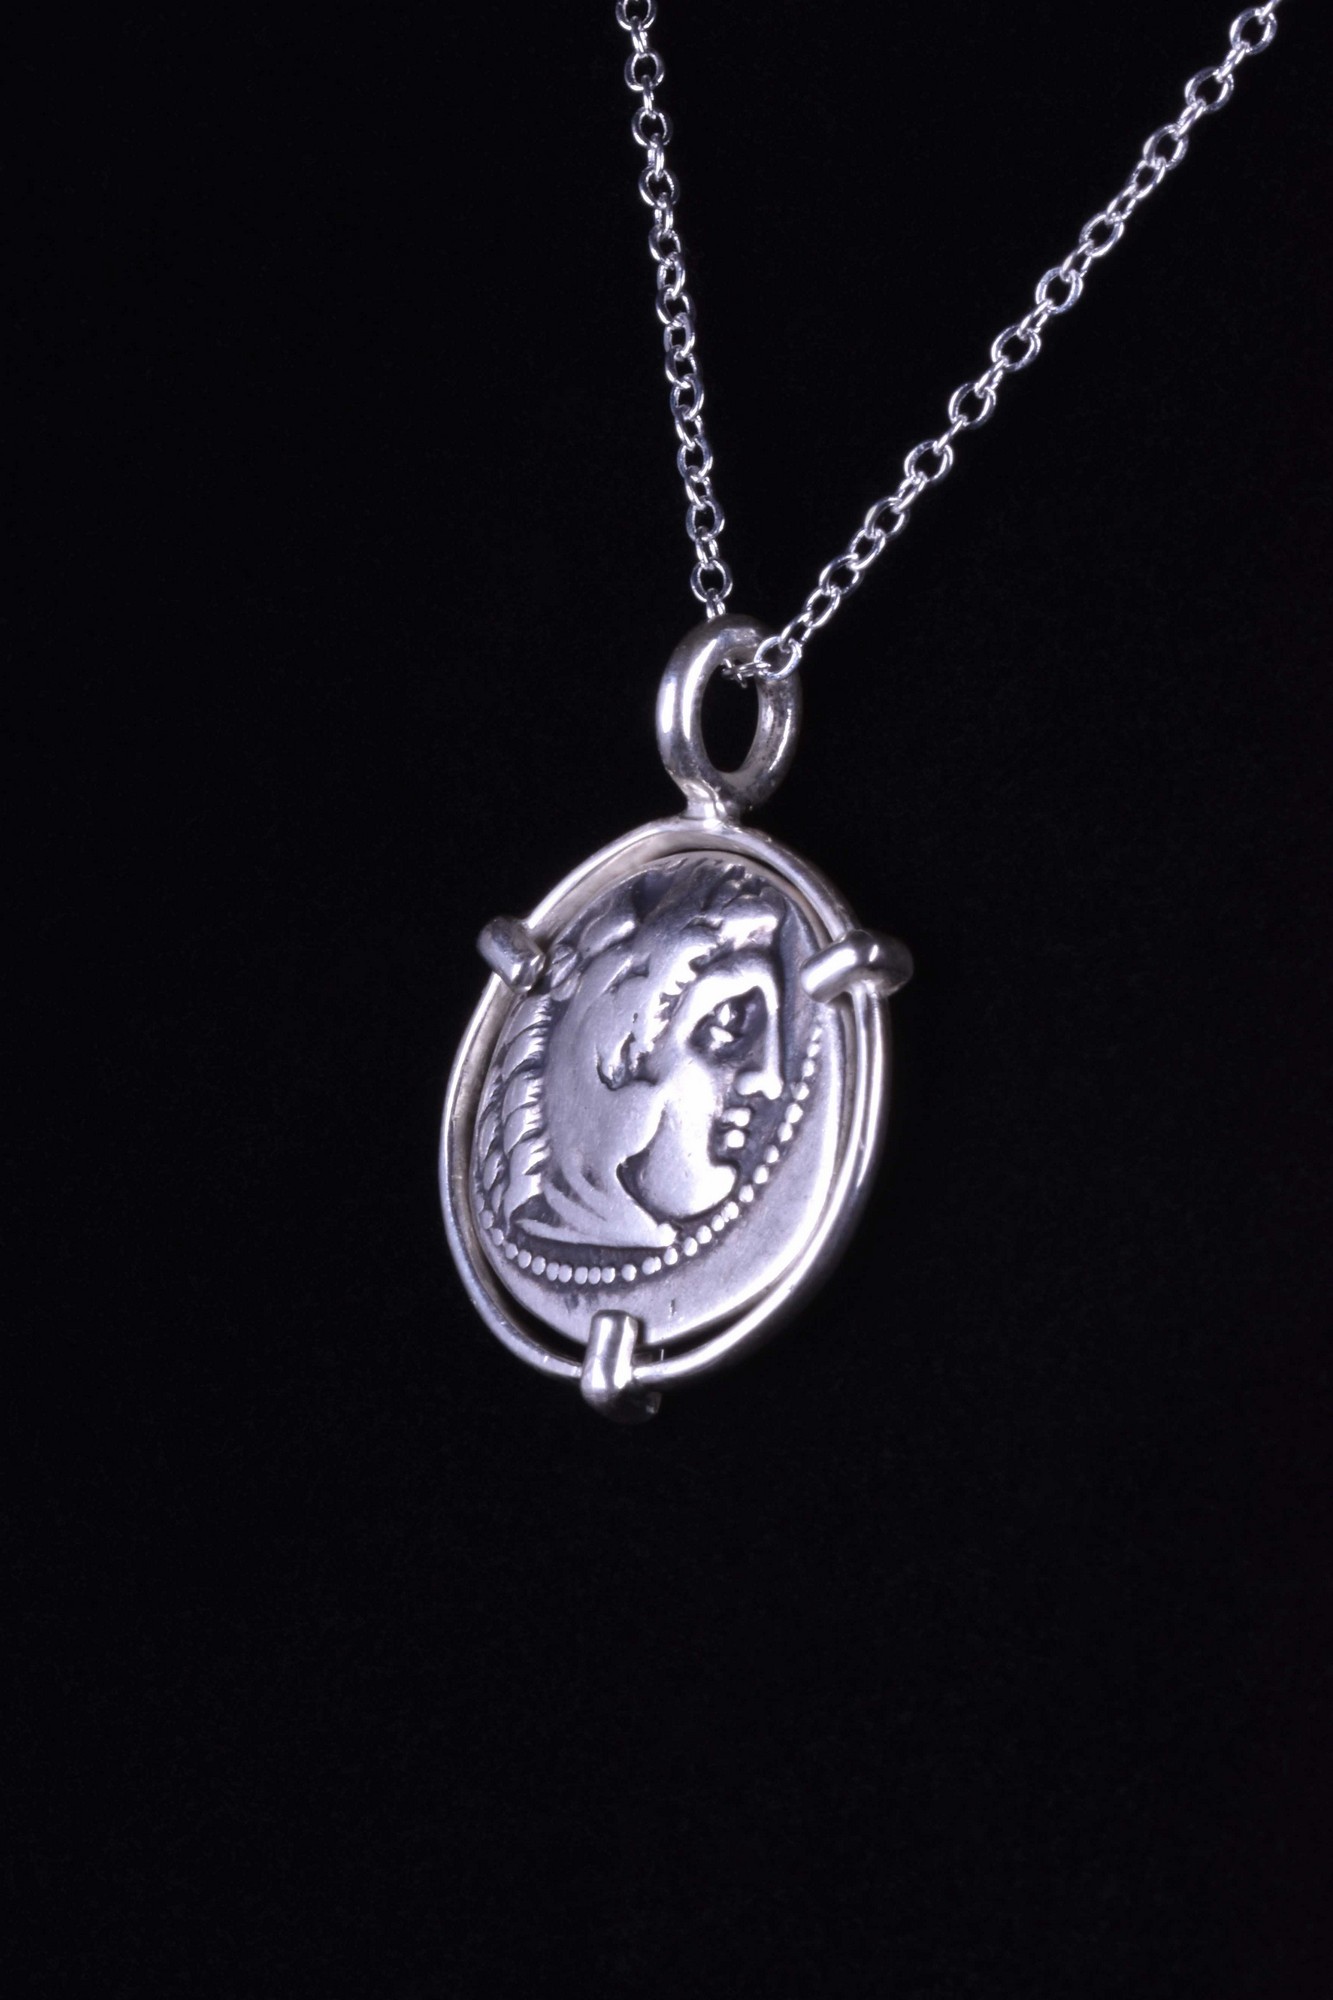 ALEXANDER THE GREAT SILVER DRACHM COIN PENDANT - Image 2 of 3